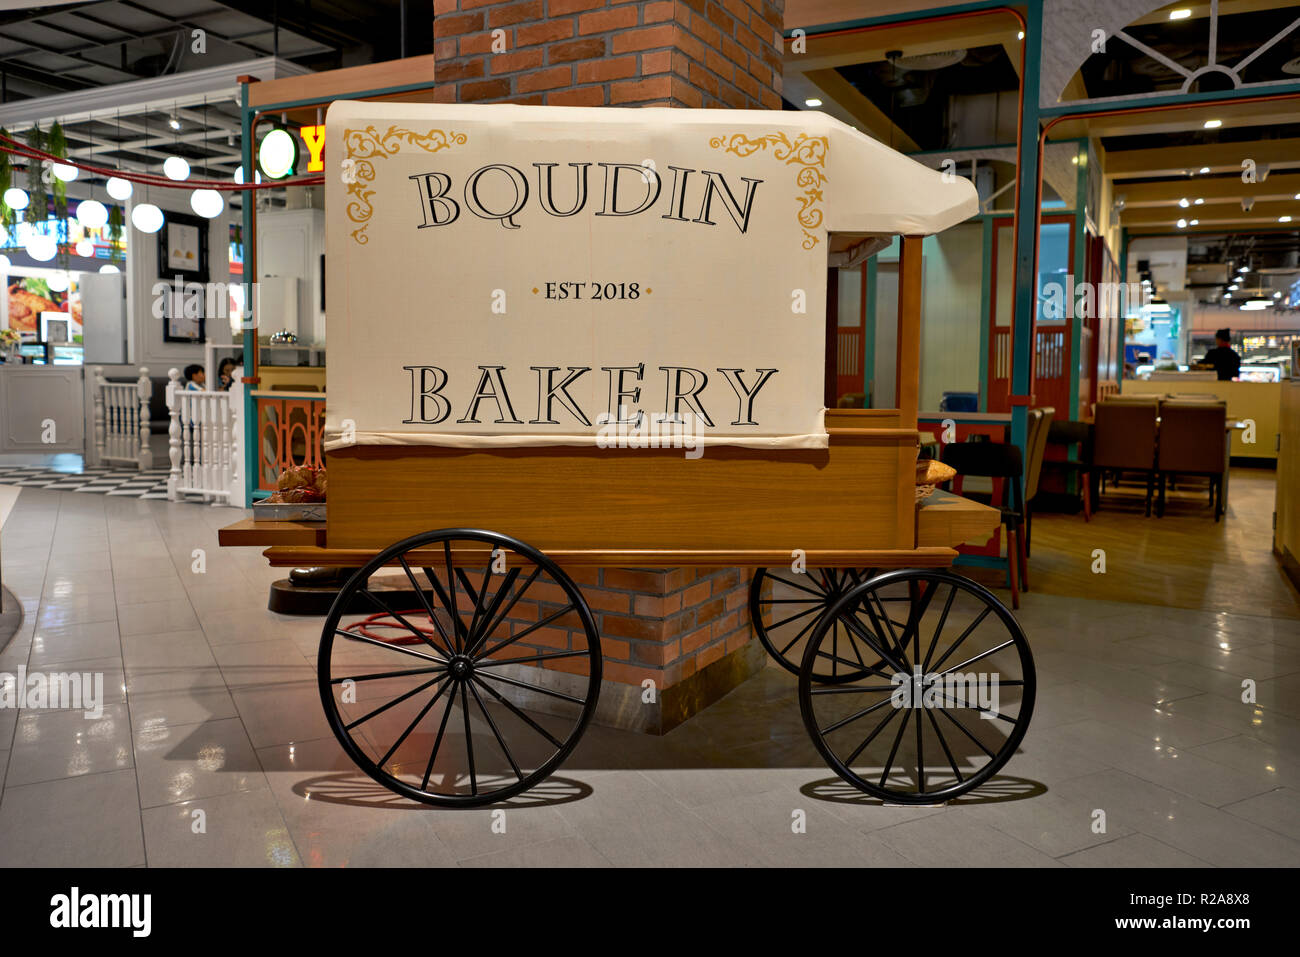 Replica vintage bakery and bread cart used as an advertising prop for artisan bakery shop. Stock Photo